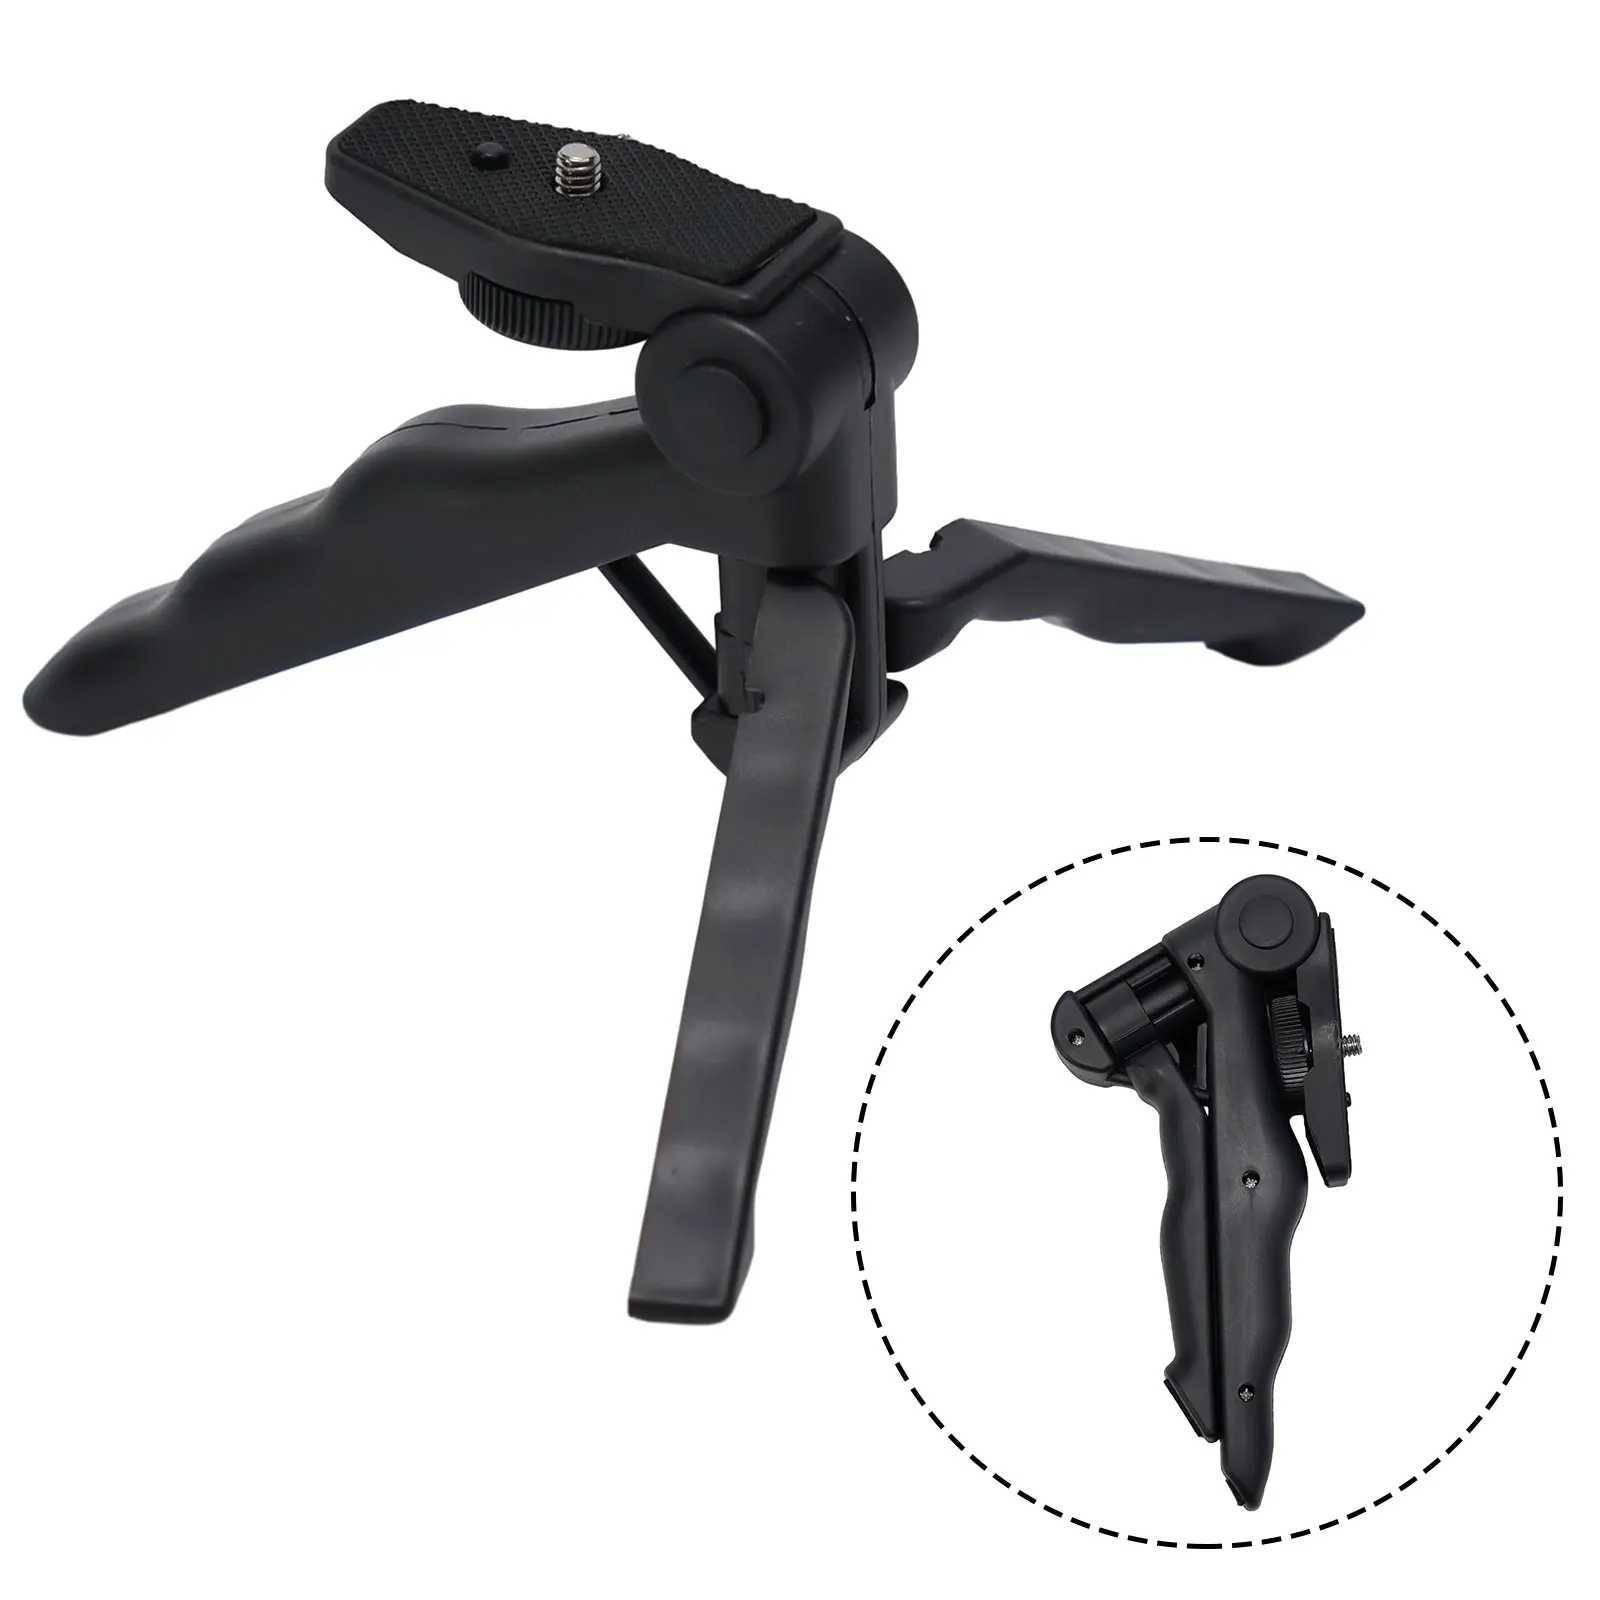 

Stable Portable Mini Tripod Phone Camera Holder With Smartphone Monopod Tripod Octopus Clip Stand Octopus